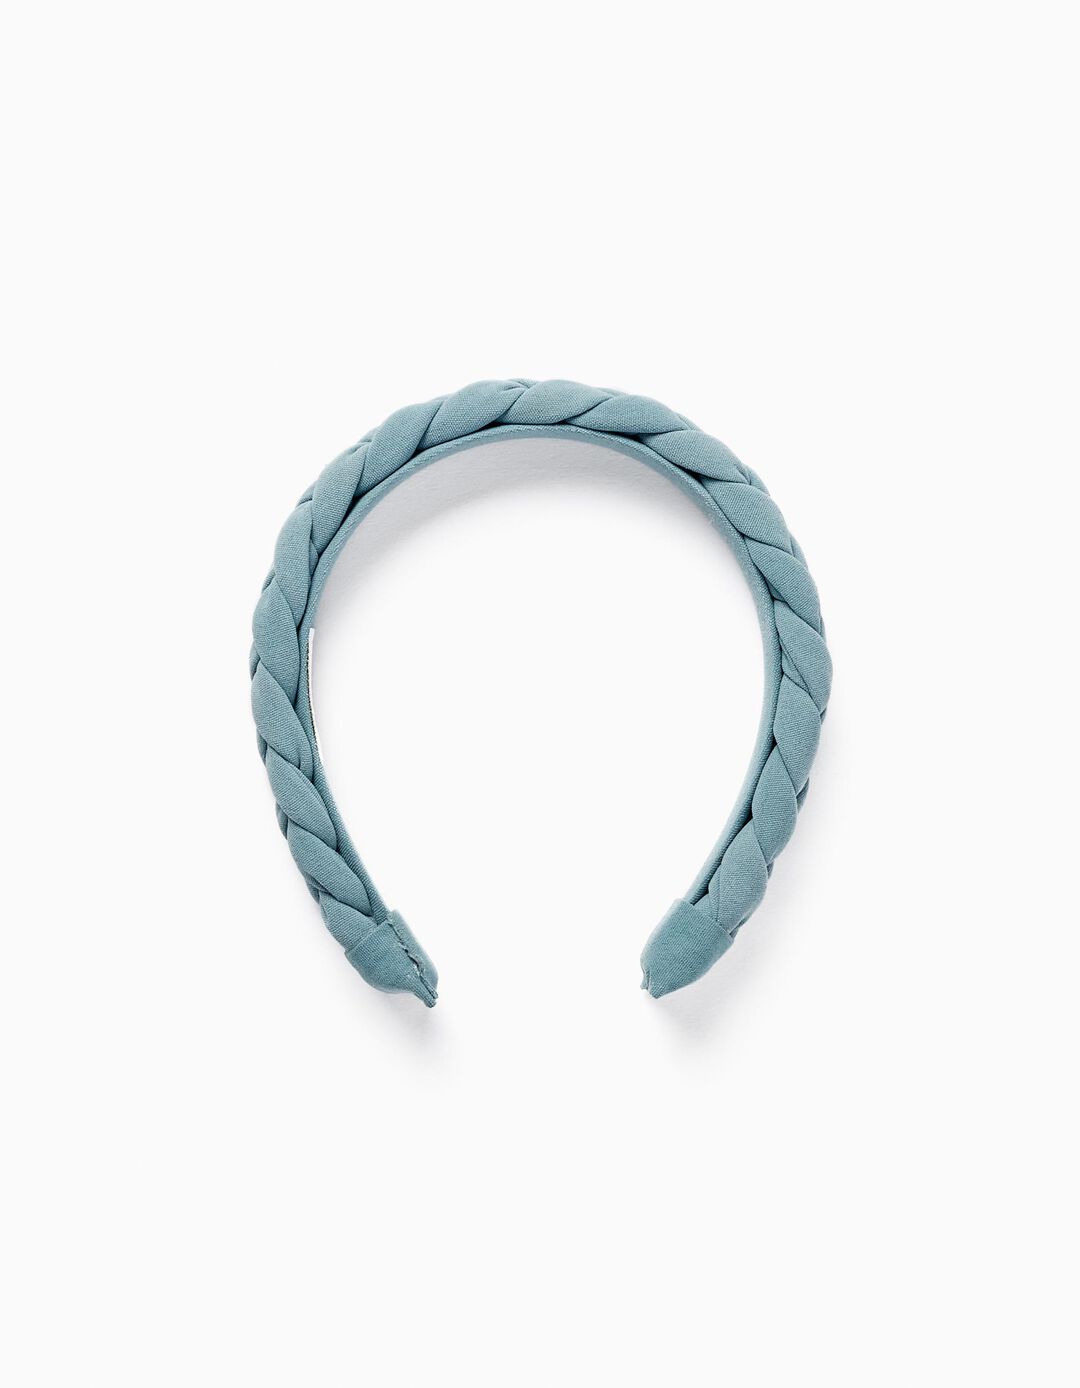 Fabric Headband with Braided Detail for Girls, Blue